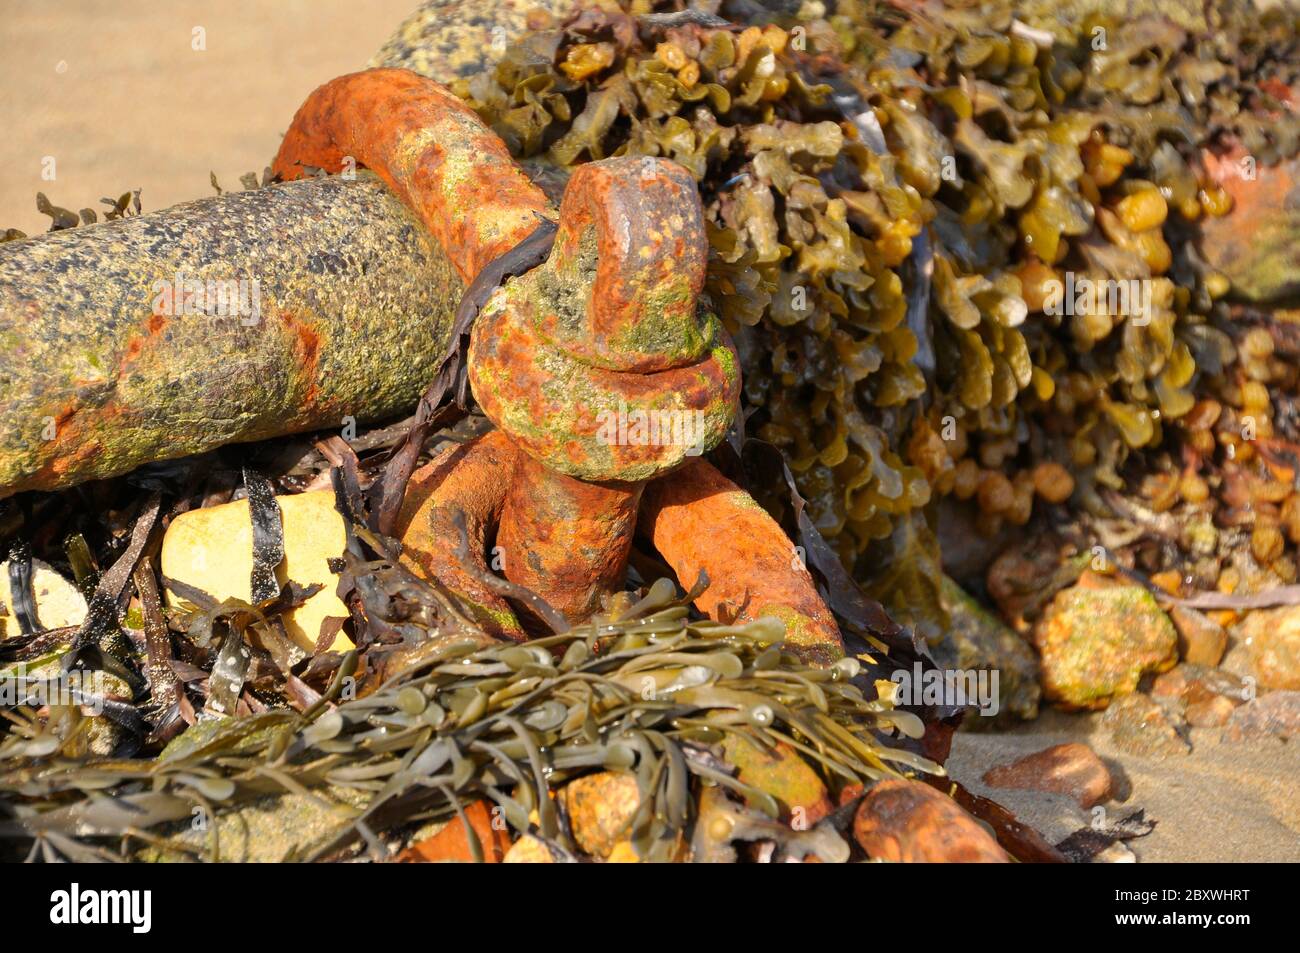 Rusty Chain and seaweed on beach, for boat mooring in harbour, at Hugh Town, St Mary's one of the five inhabited islands in the Isles of Scilly archip Stock Photo